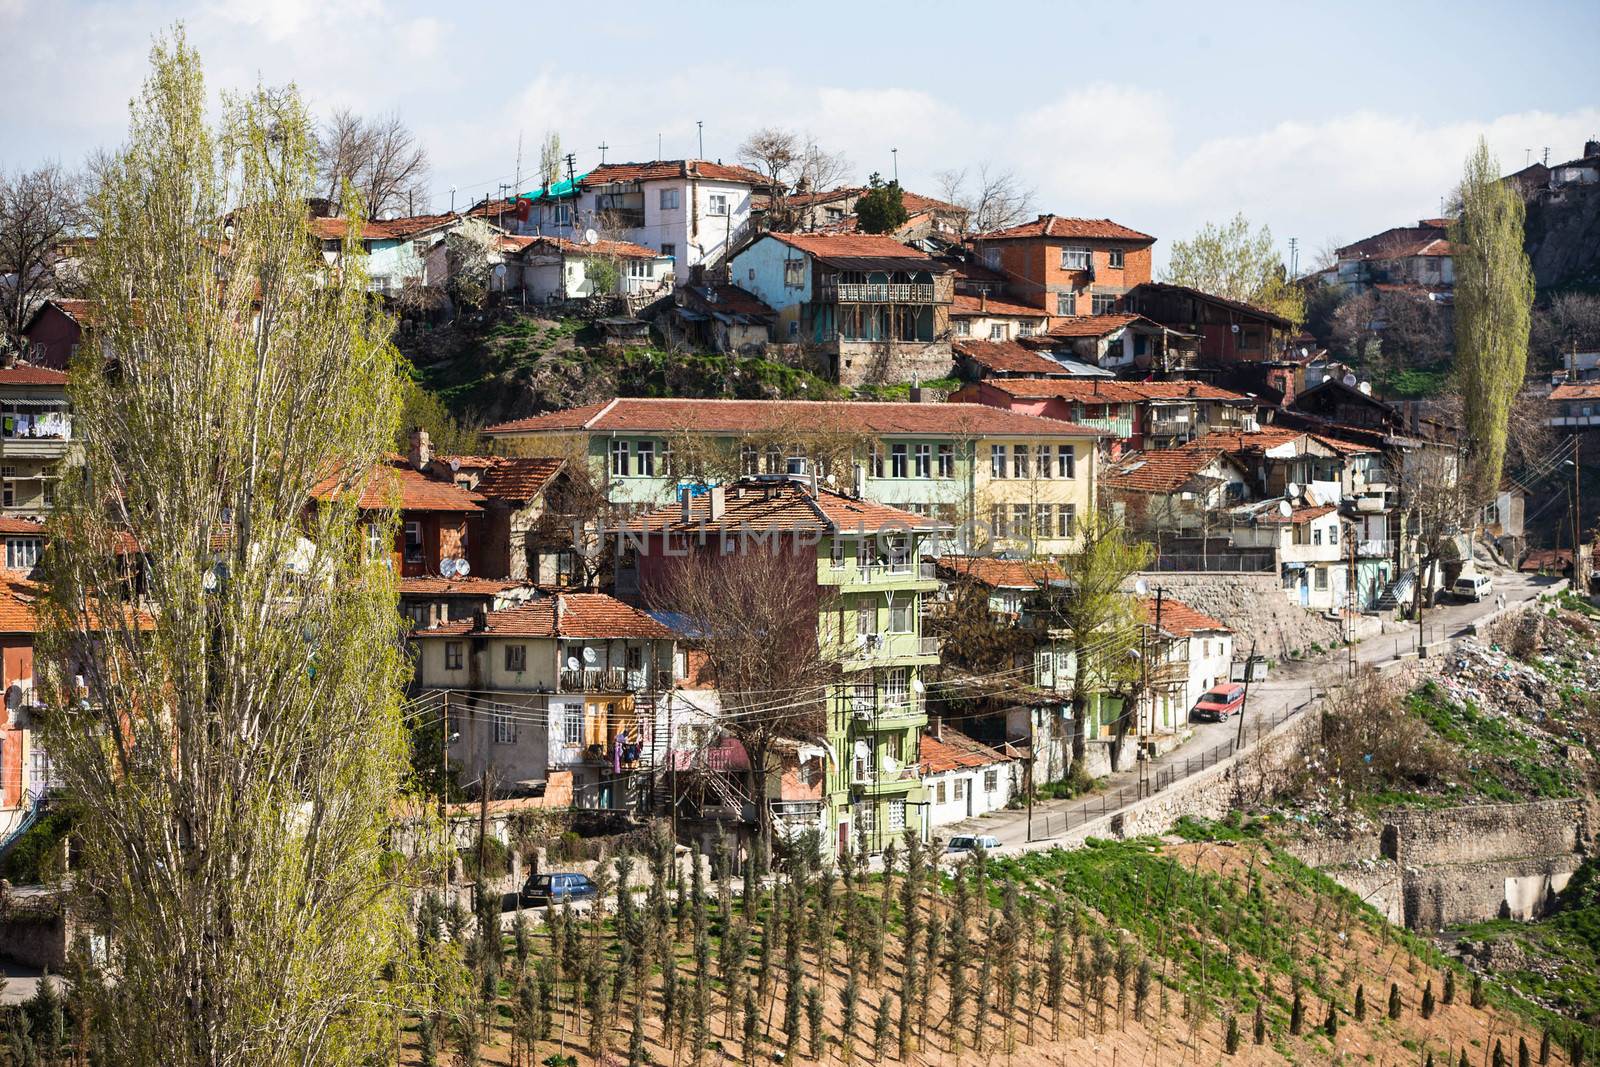 Typical residential area in Ankara